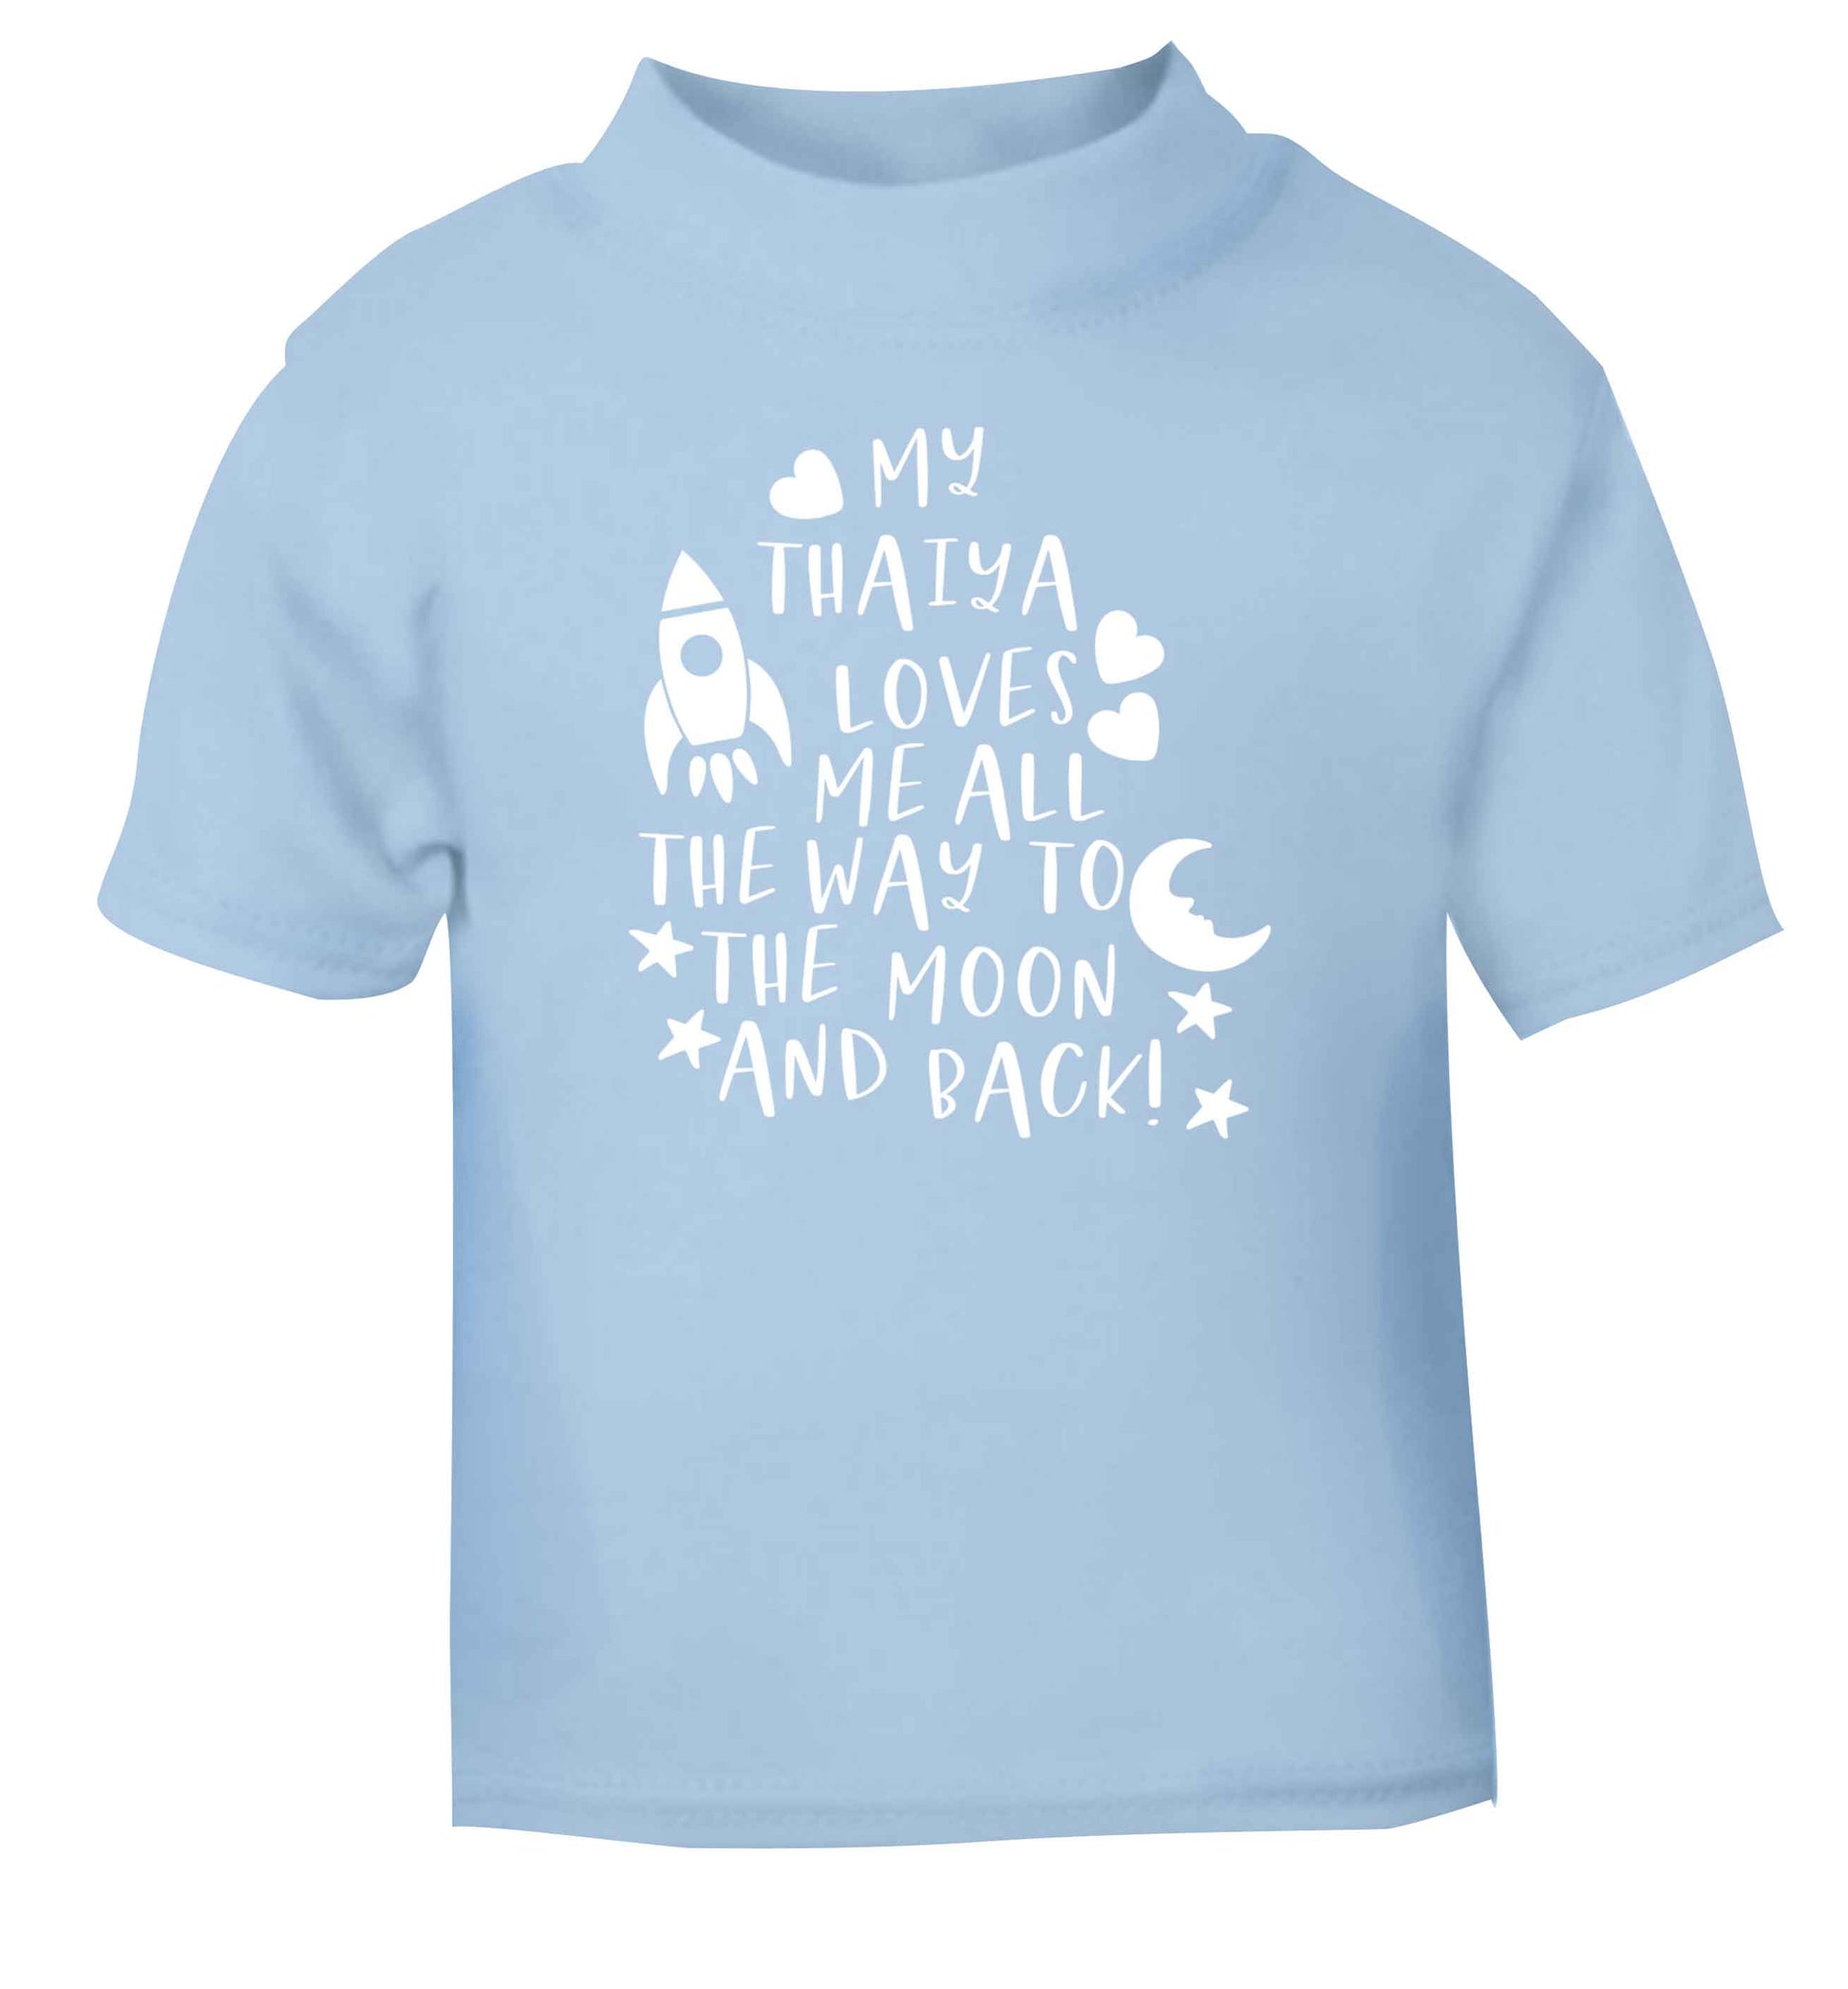 My thaiya loves me all the way to the moon and back light blue Baby Toddler Tshirt 2 Years